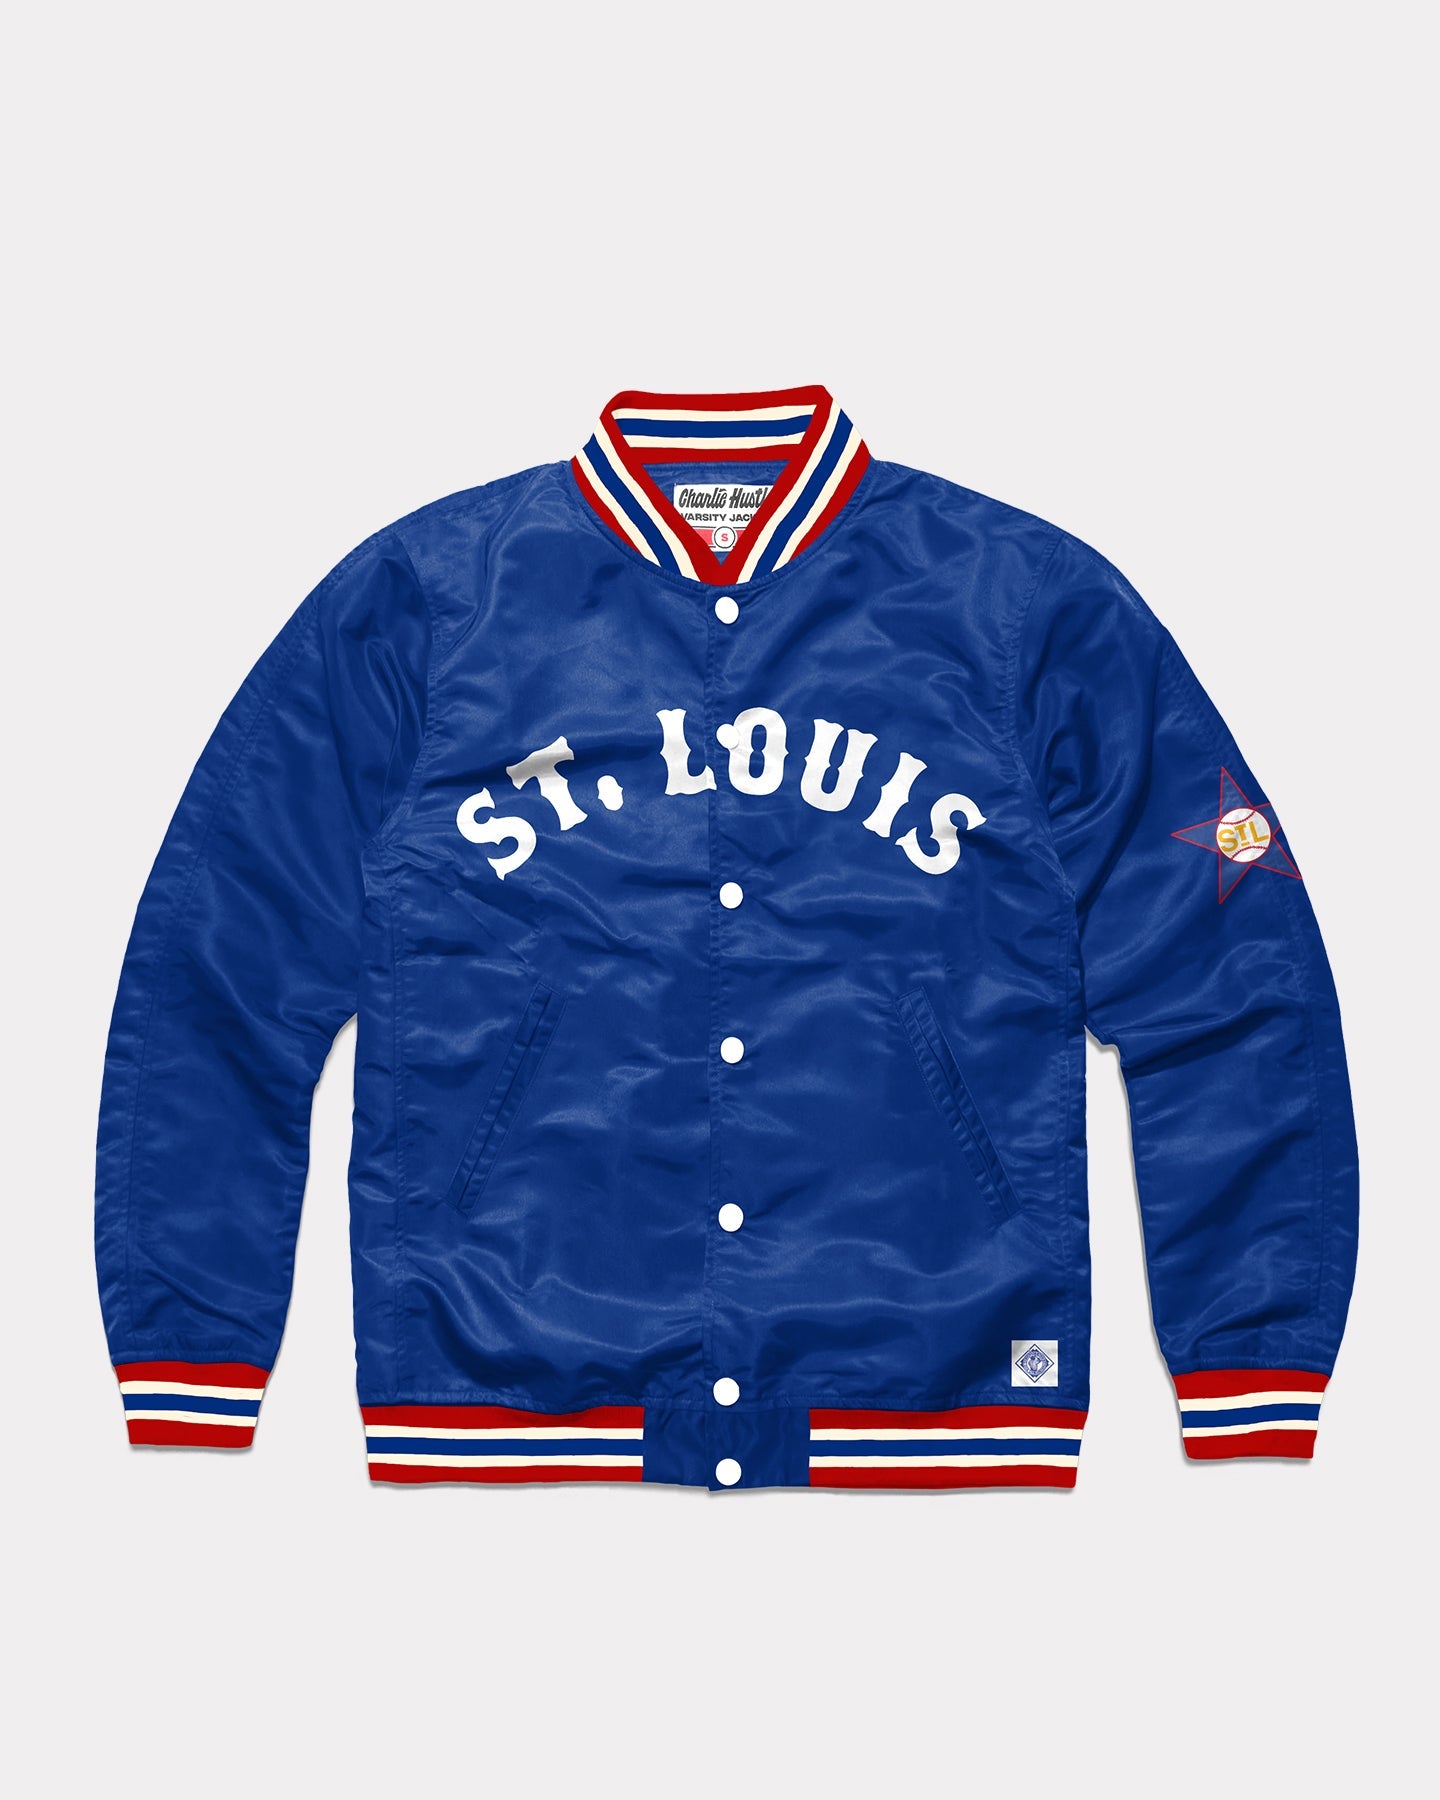 St. Louis Stars 1931 Home Jersey